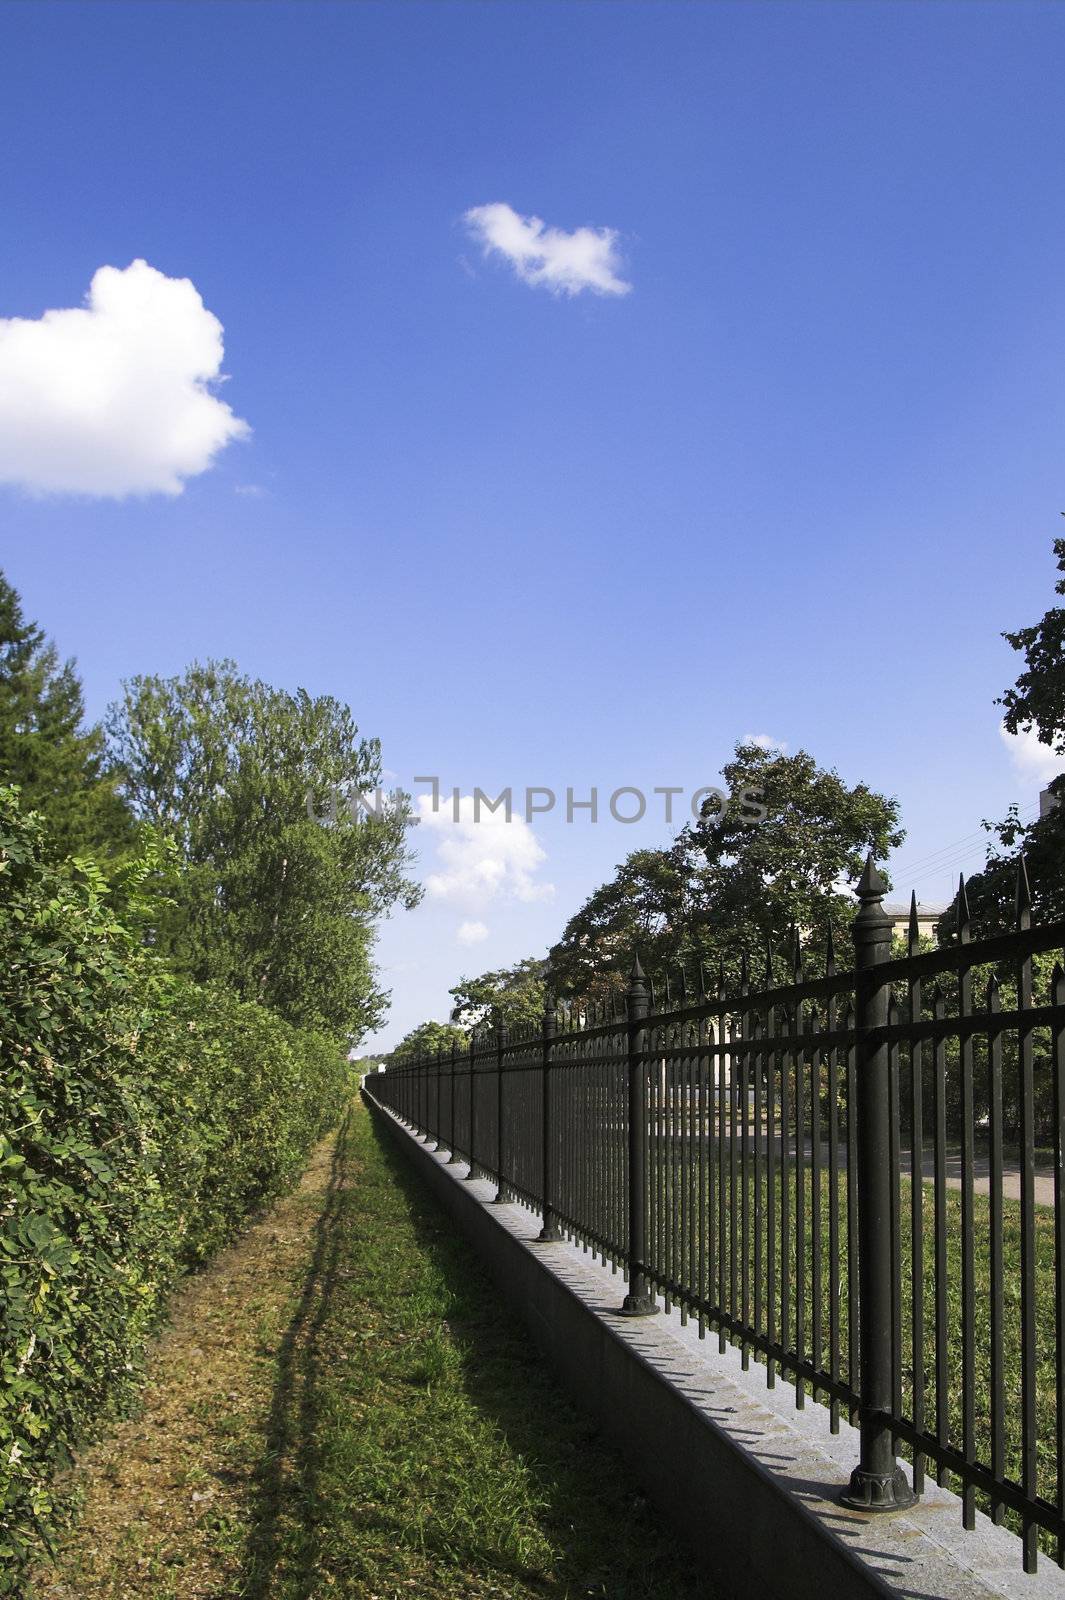 Iron Fence in Summer Park